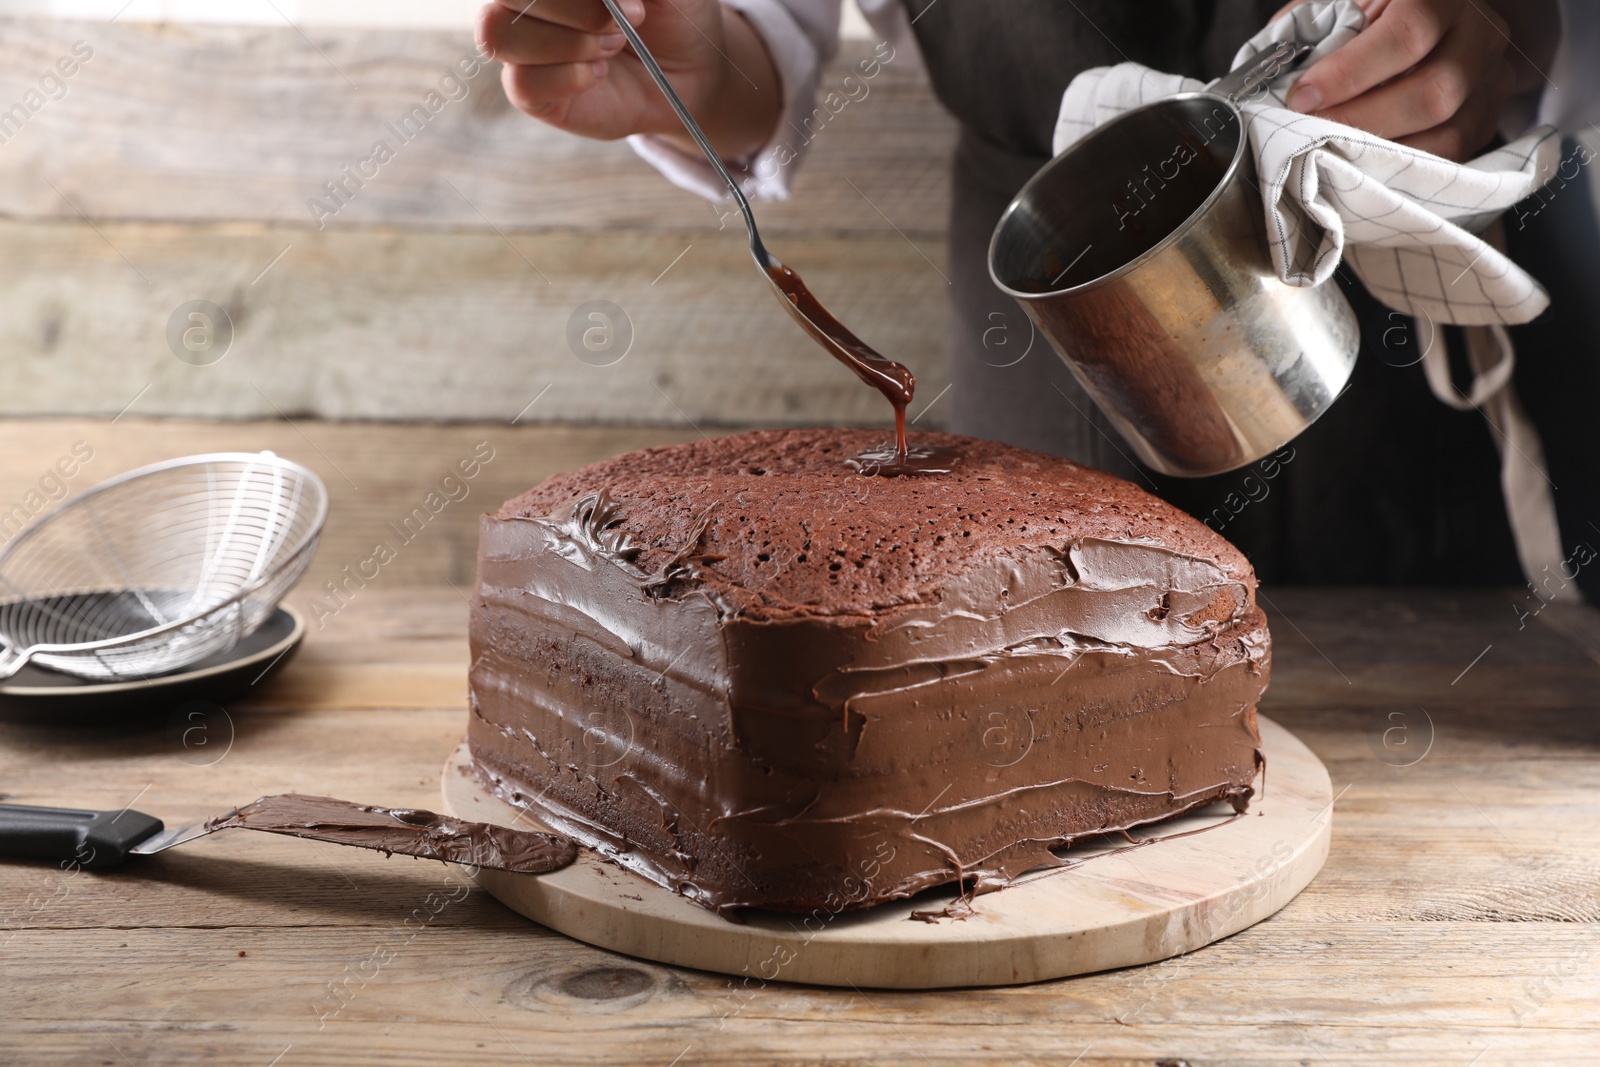 Photo of Woman pouring chocolate cream into homemade sponge cake at wooden table, closeup